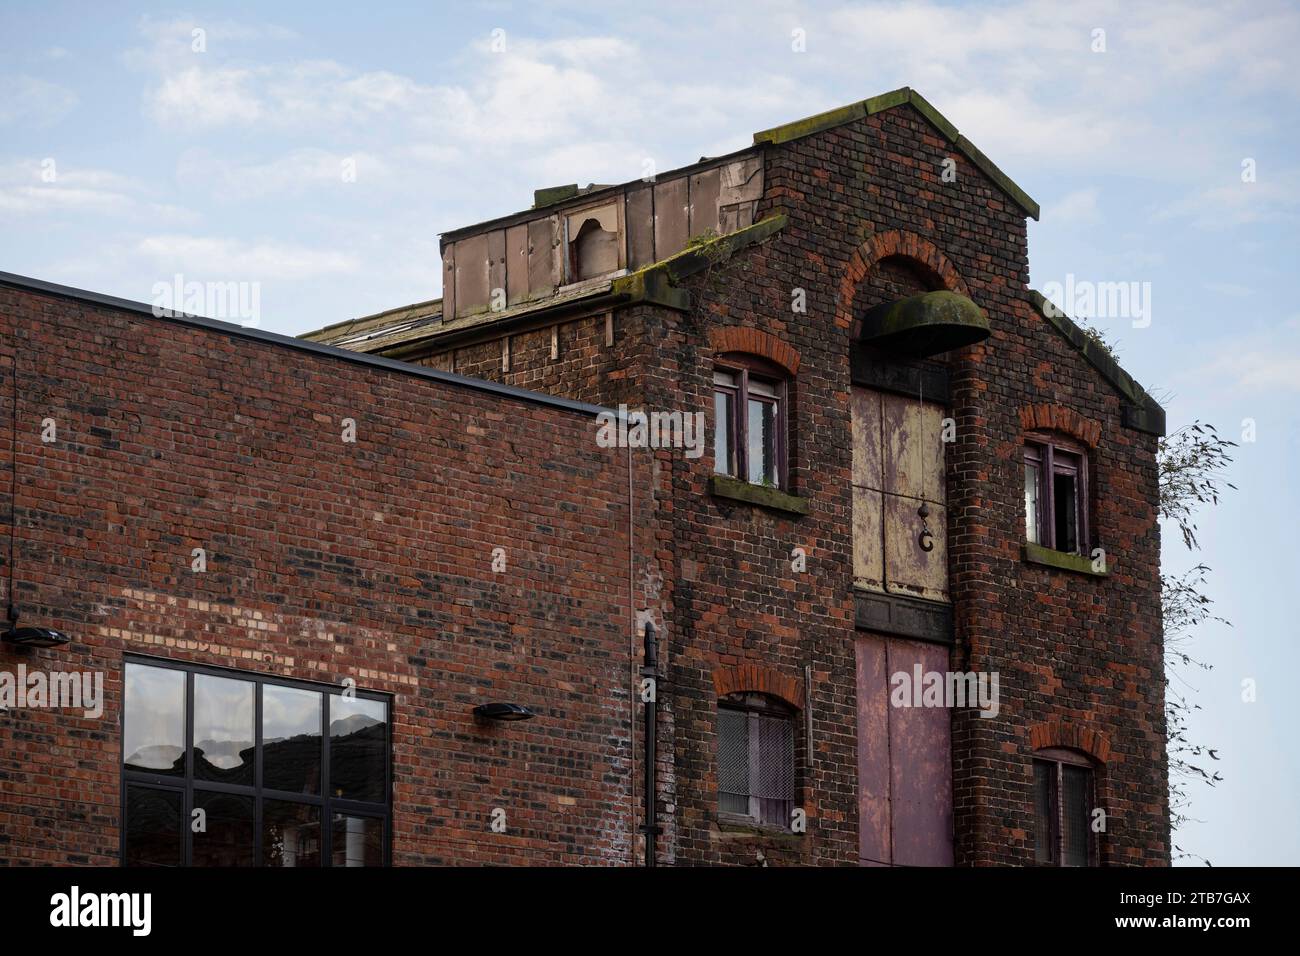 Derelict Warehouse, Blundell St, Liverpool, Royaume-Uni Banque D'Images